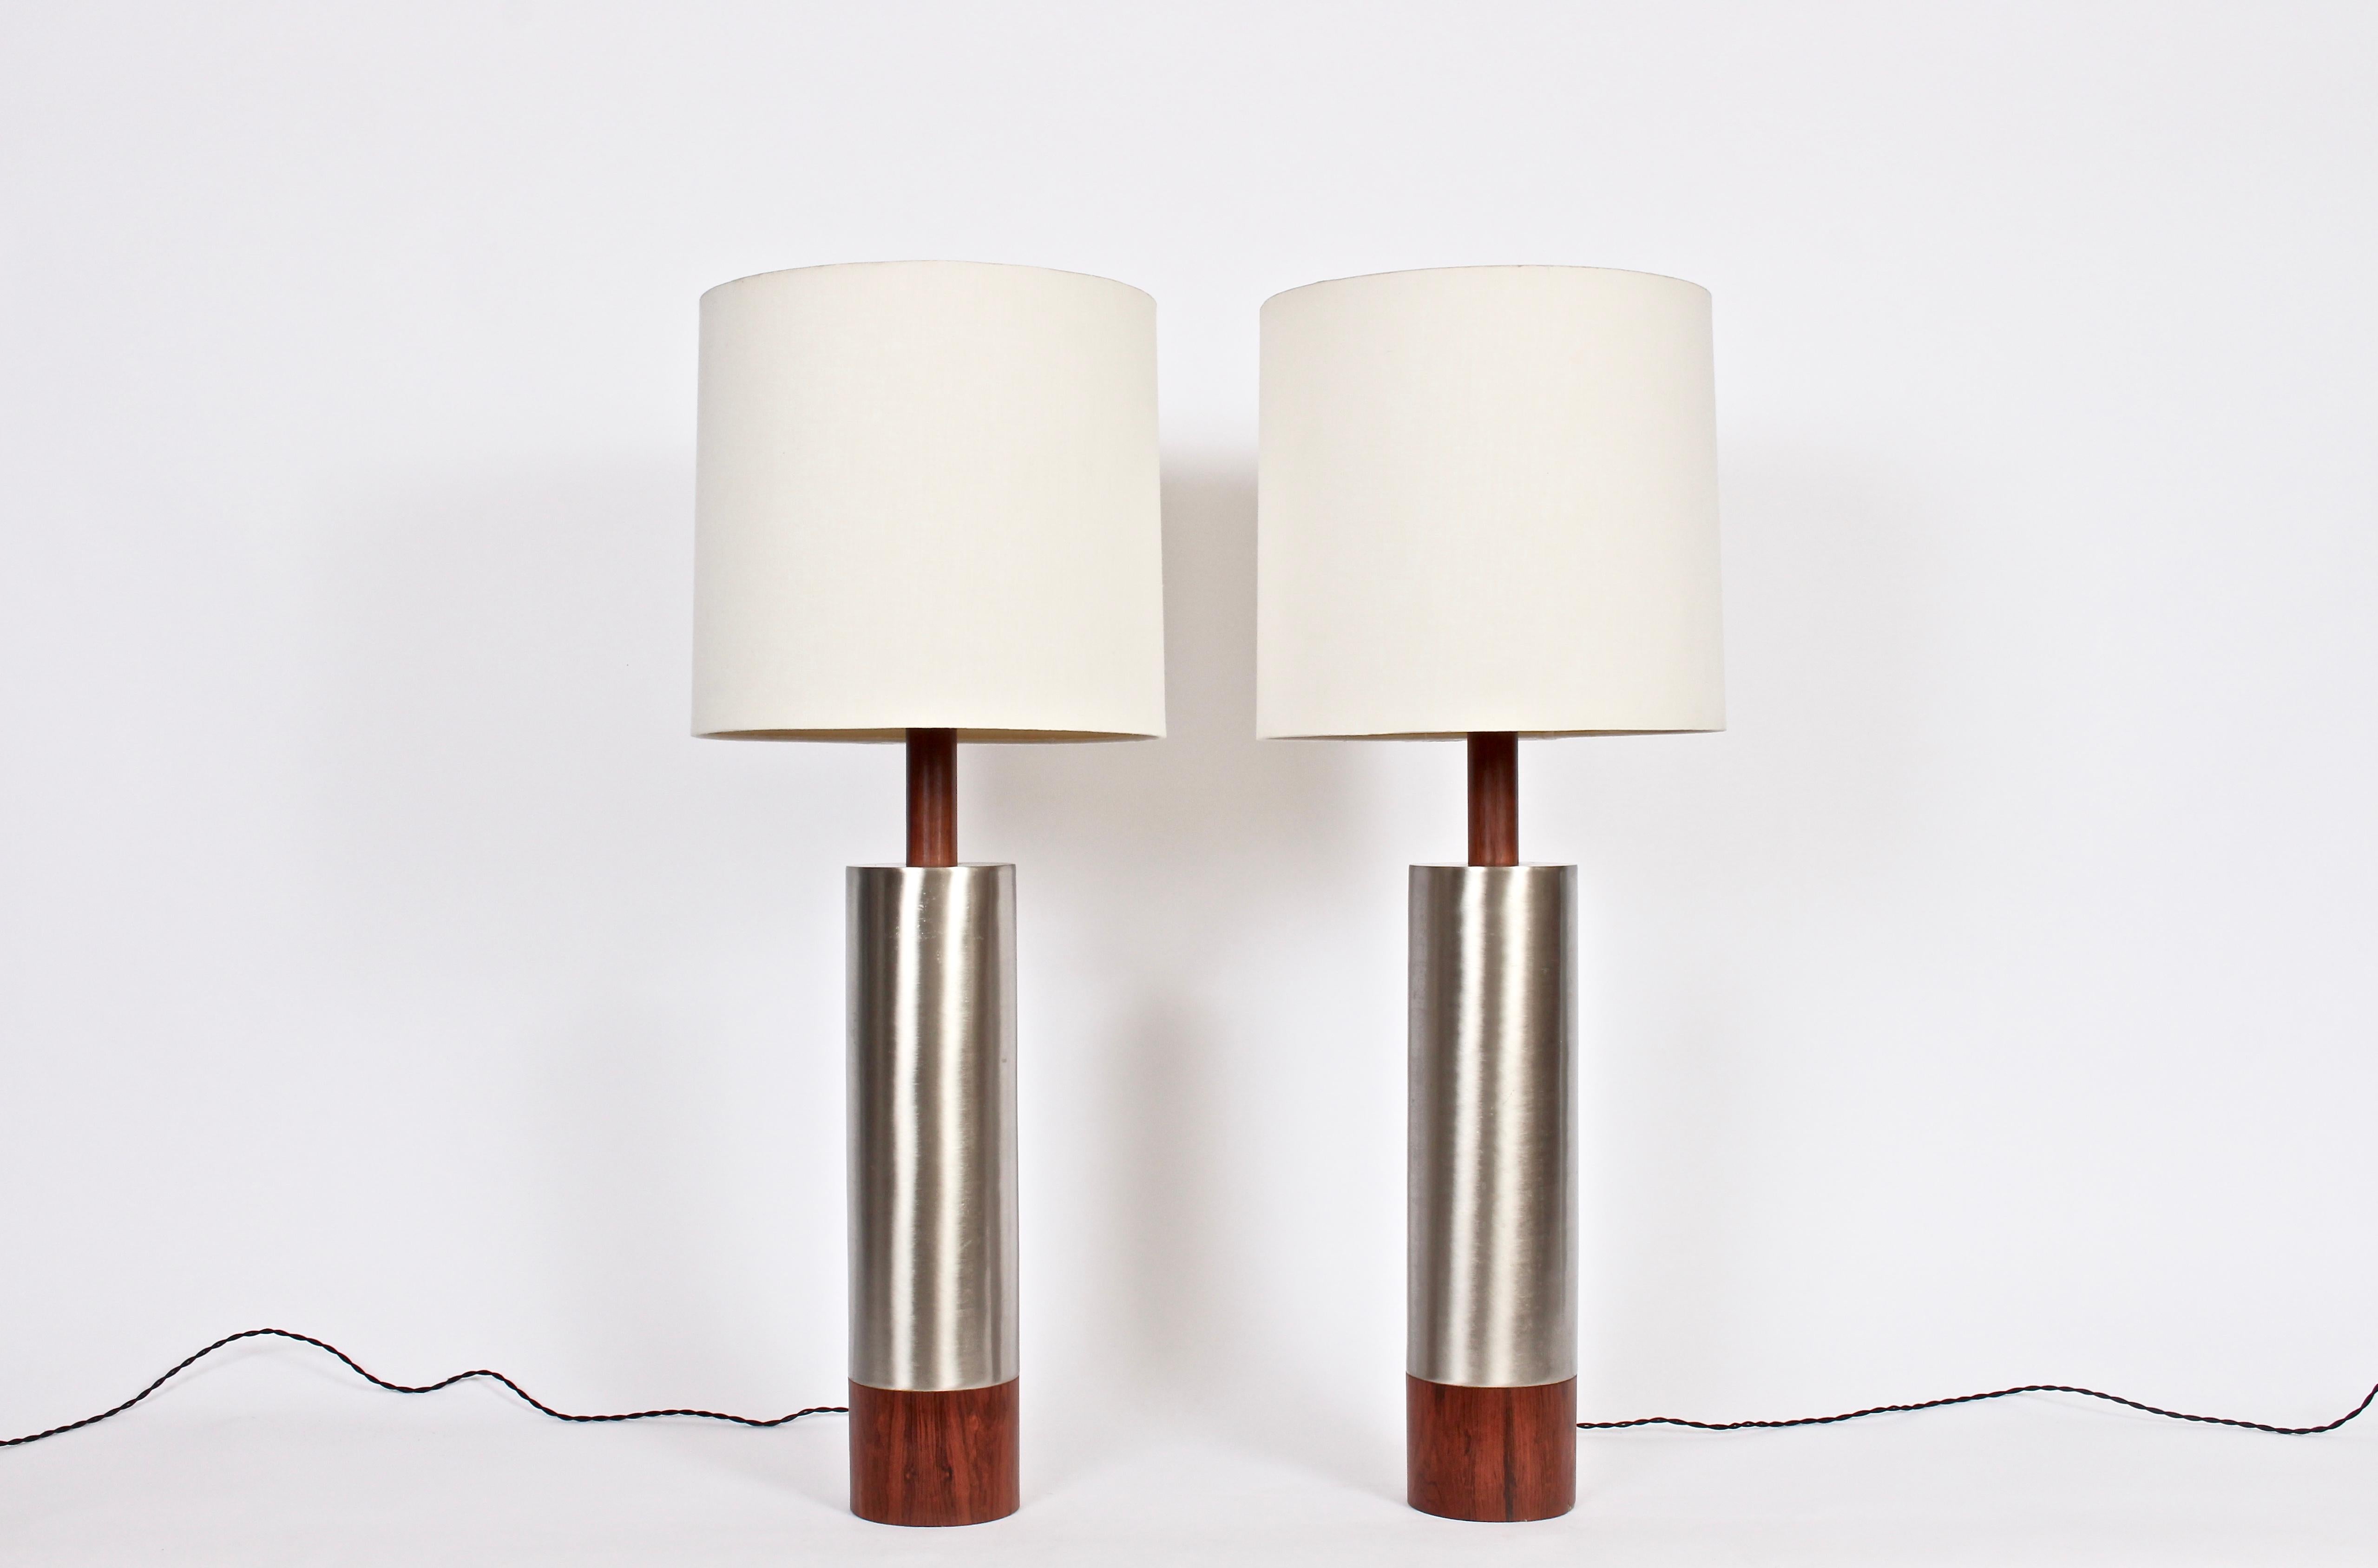 Pair of Substantial Laurel Lamp Co. tower table lamps in brushed aluminum and walnut, 1960s. 3' H. Small footprint. Featuring a slender, reflective brushed aluminum column, neck and base surrounded with thick Walnut veneer. 28 H to top of socket.